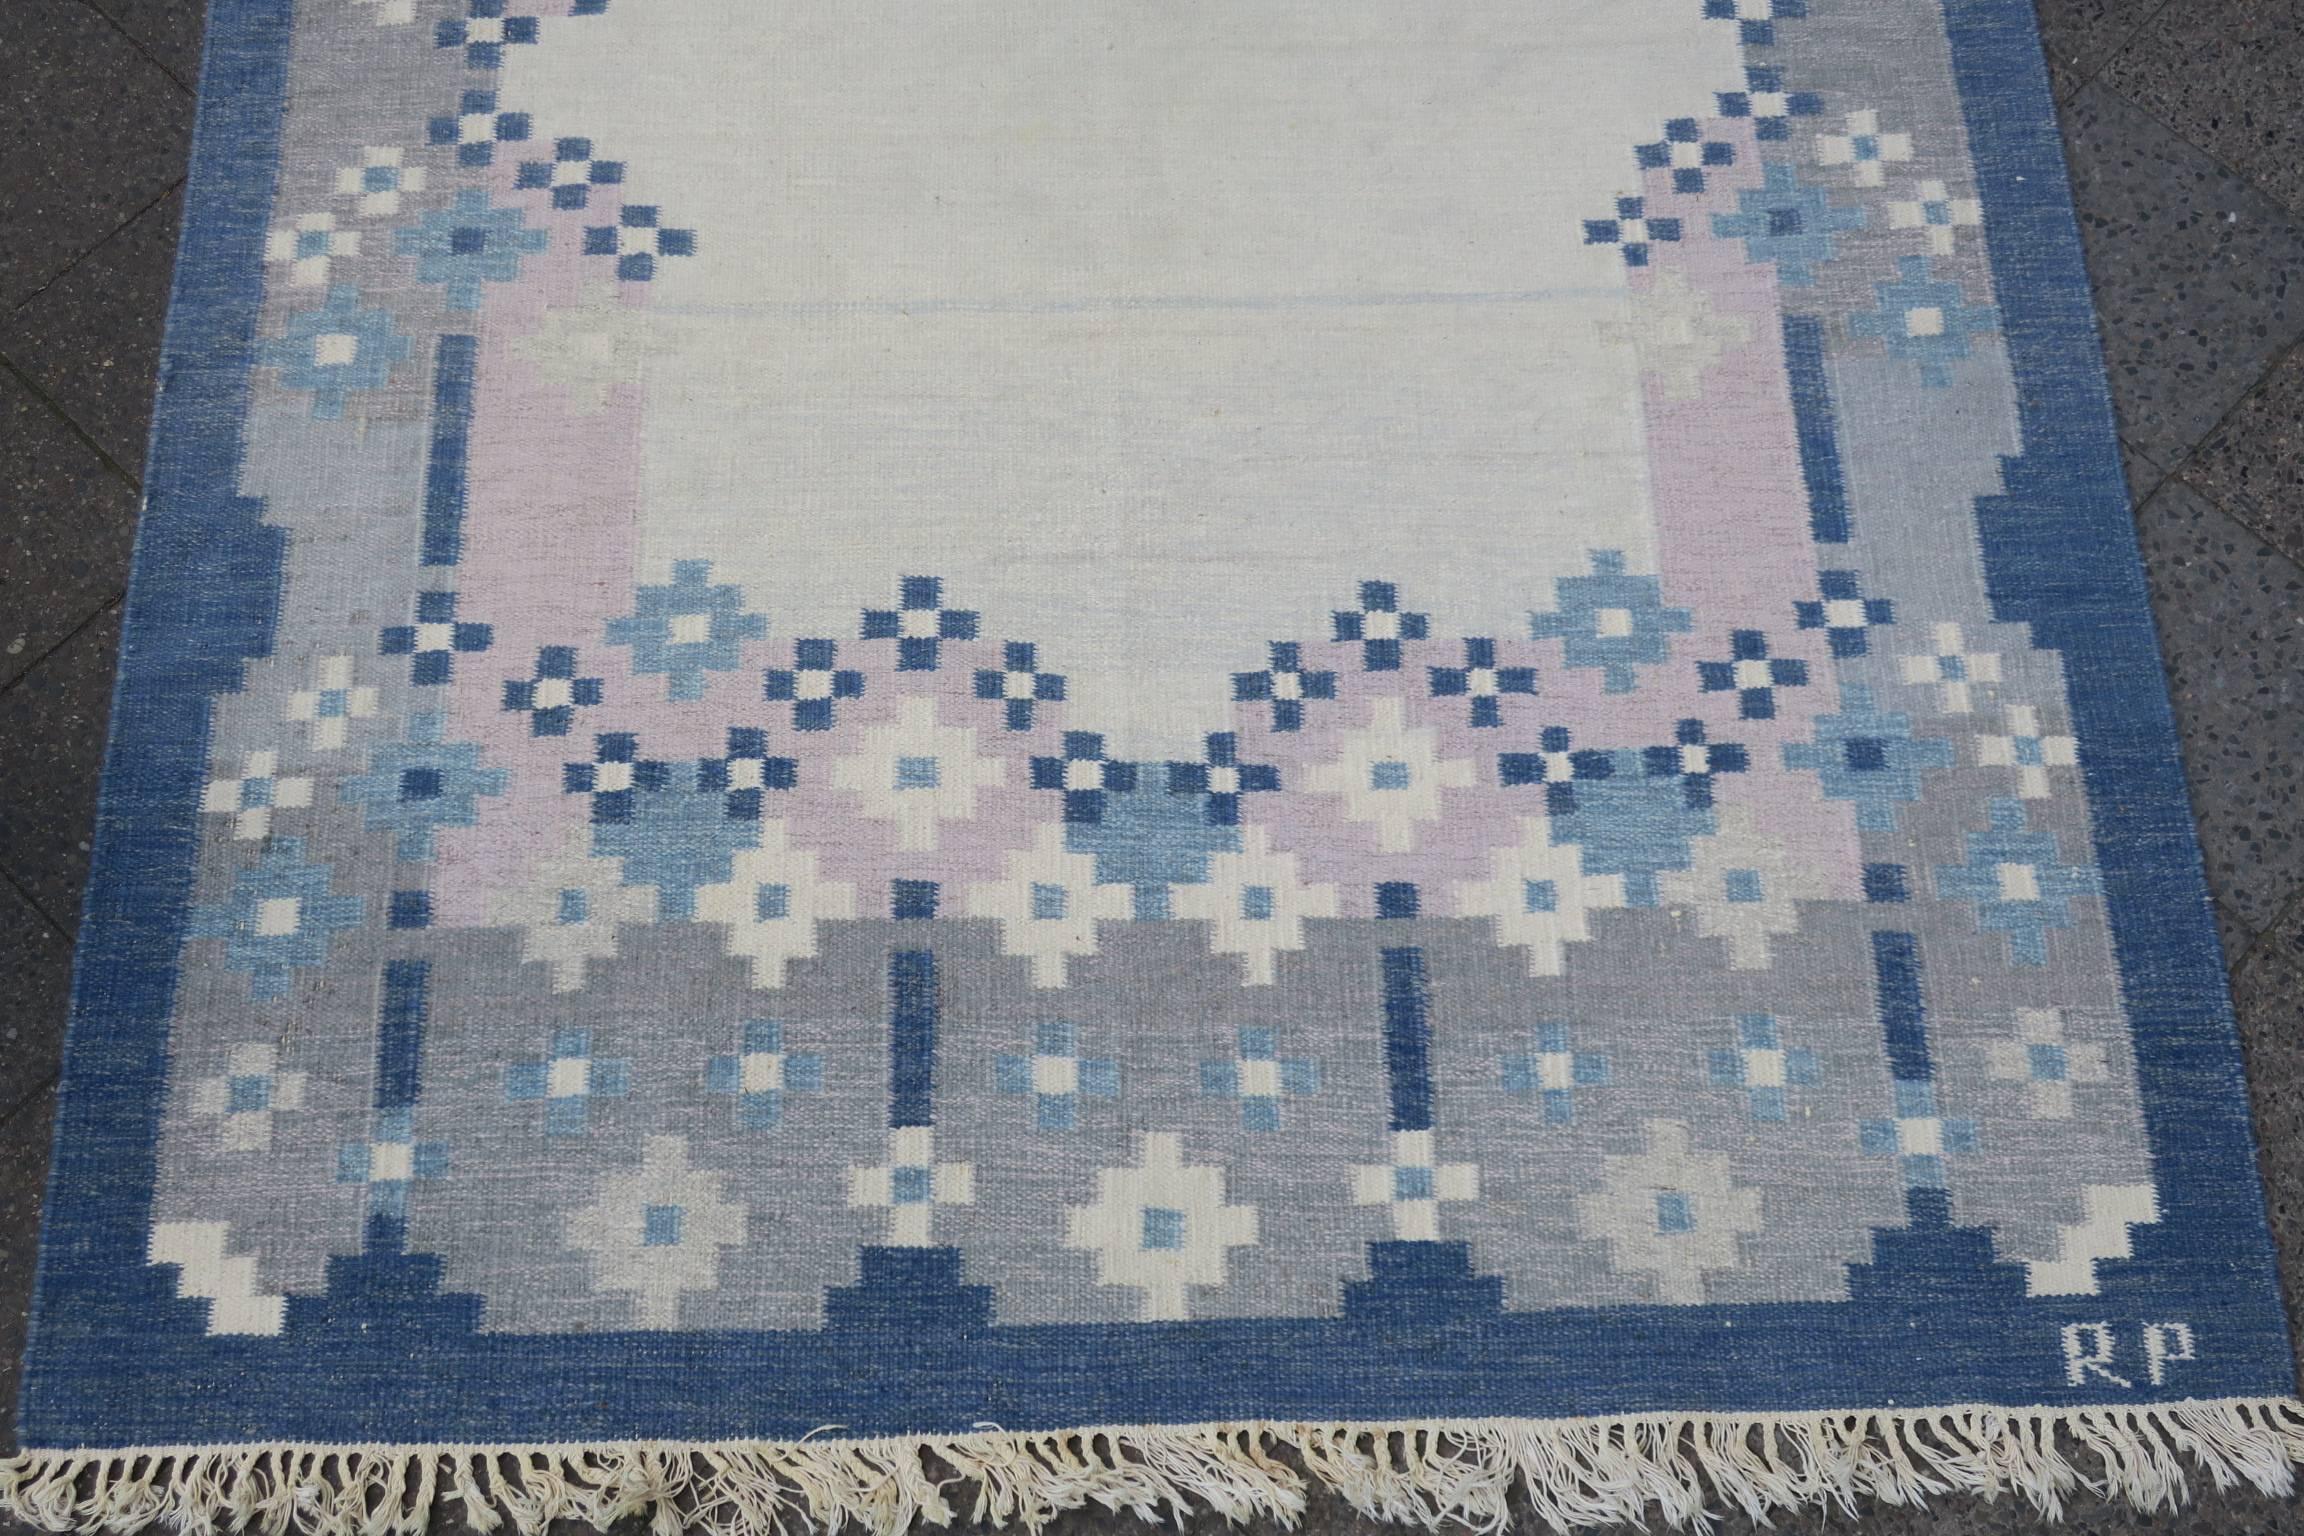 Midcentury Swedish Röllakan signed kelim with a geometric design in light colors. Both sides can be used, with slightly different coloring on each side (the last three pictures show the 'back' of the rug).